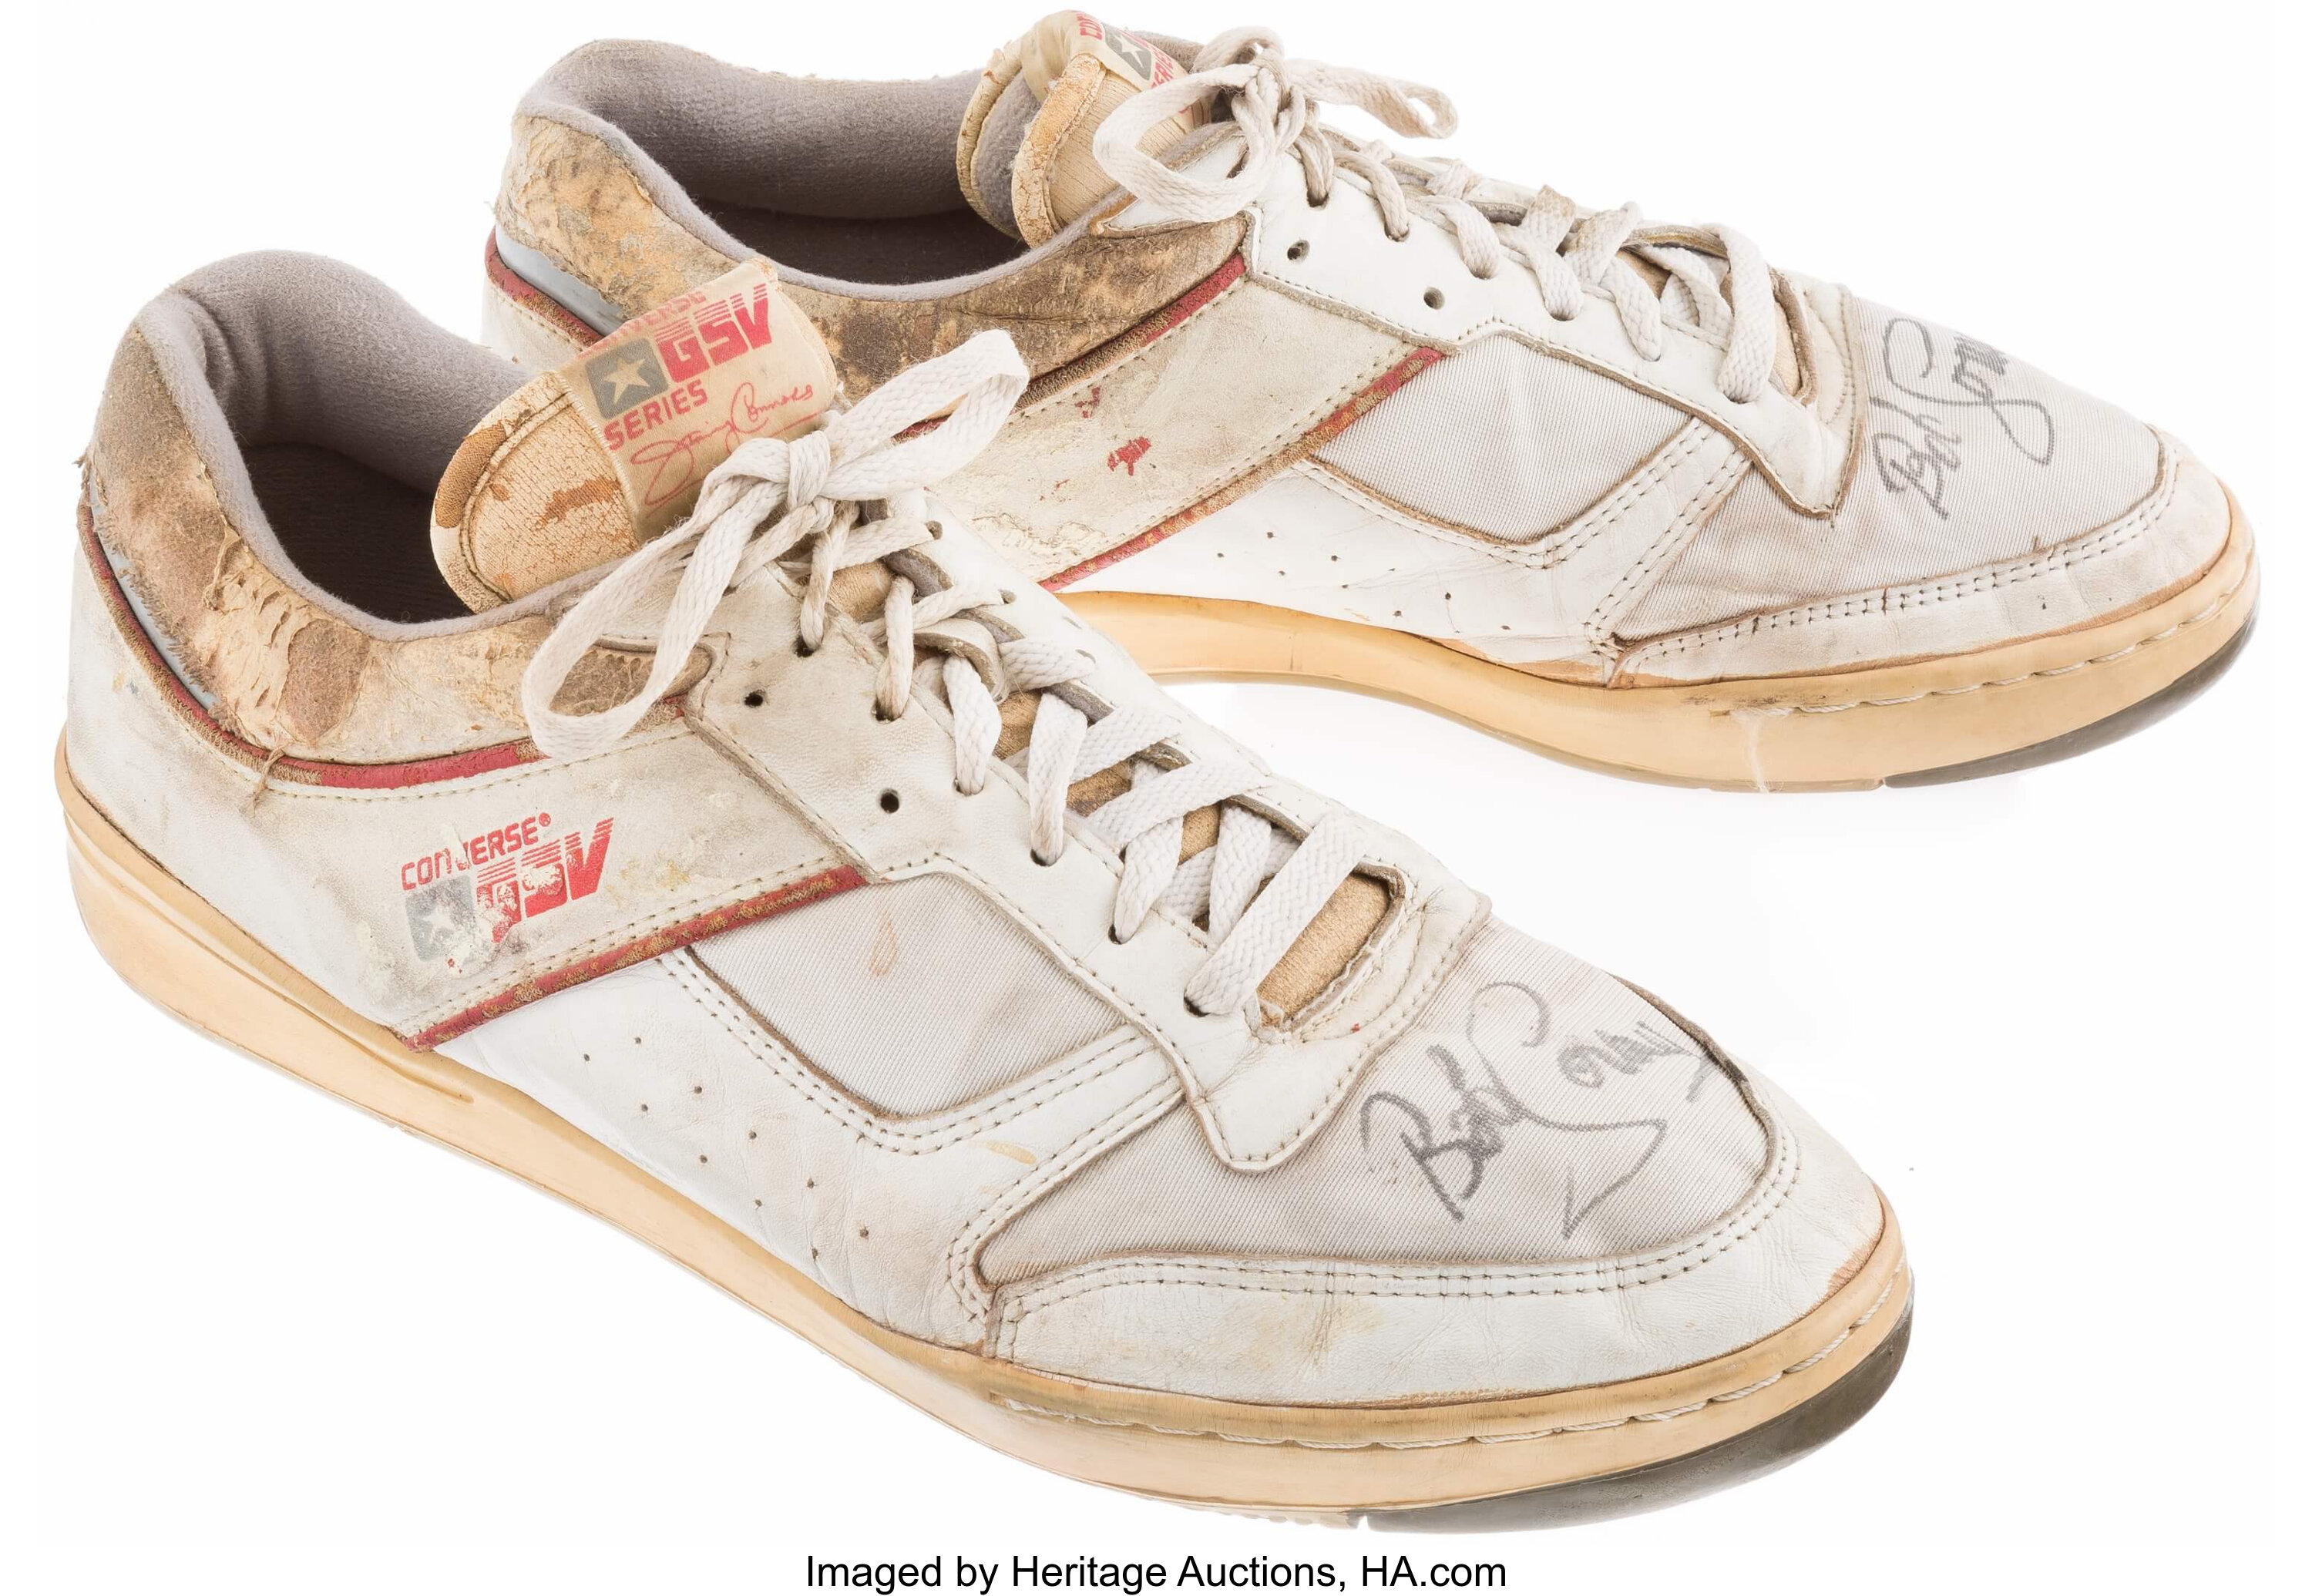 Bob Cousy Signed Shoes.... Basketball Collectibles Others | Lot #44094 ...